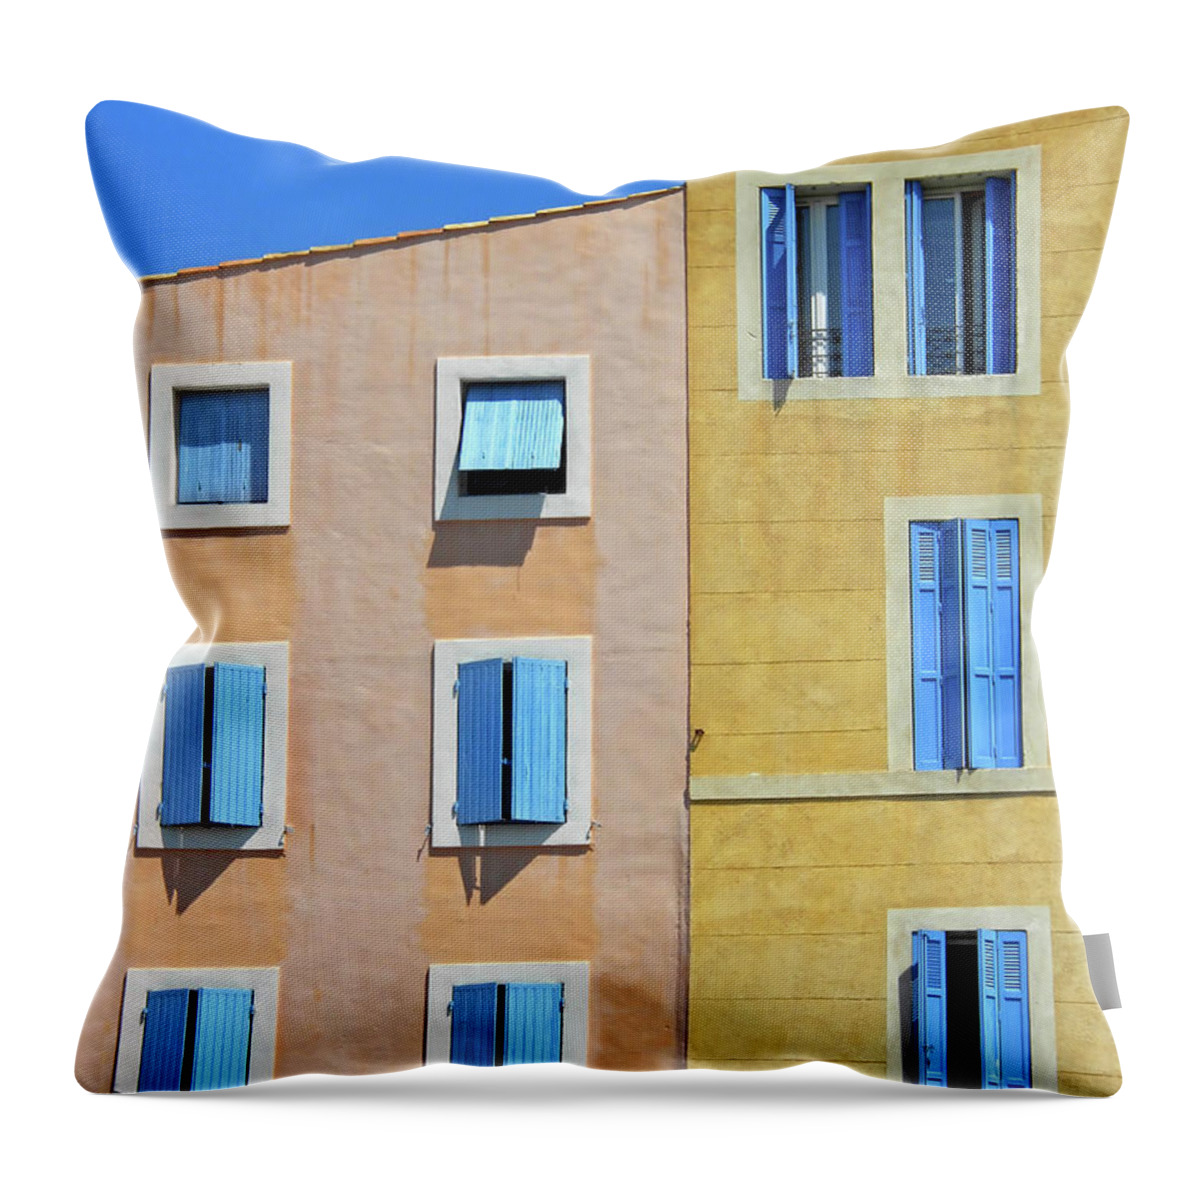 Windows Throw Pillow featuring the photograph Windows Martigues Provence France by Dave Mills